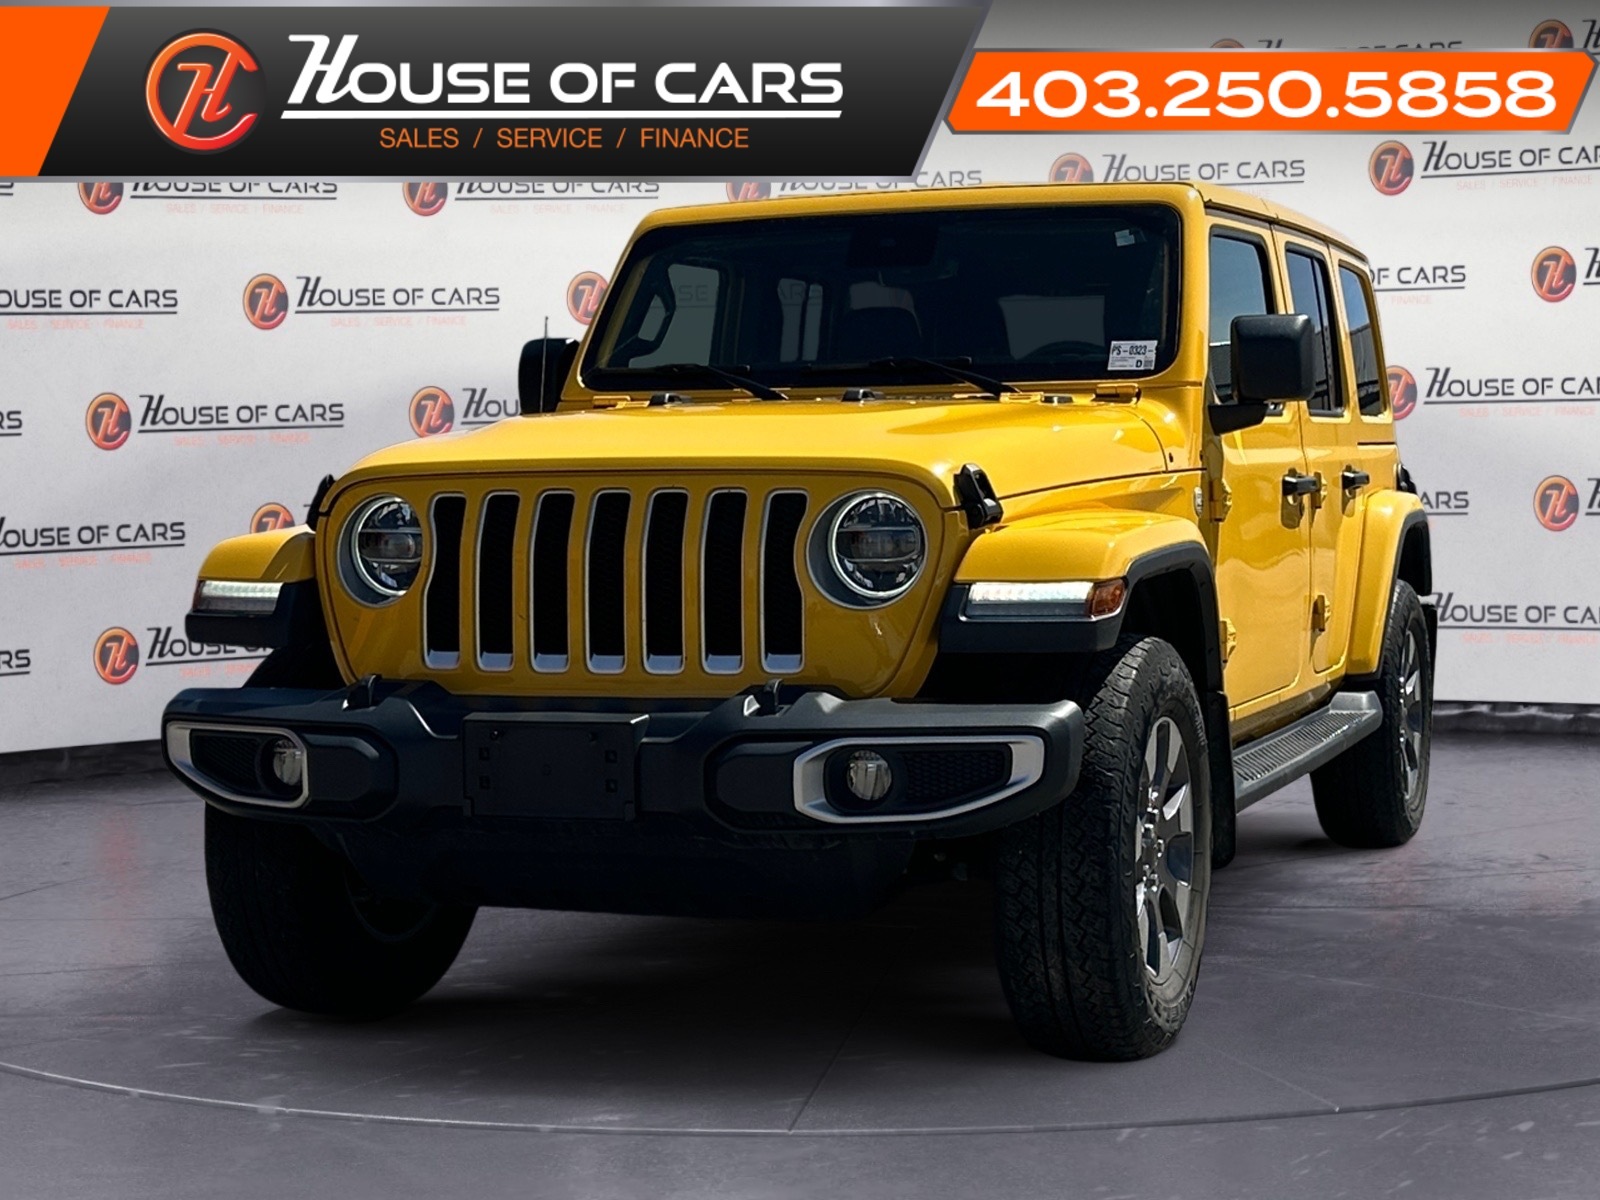 2019 Jeep WRANGLER UNLIMITED Sahara 4x4 WITH/ REMOTE START AND HEATED SEATS